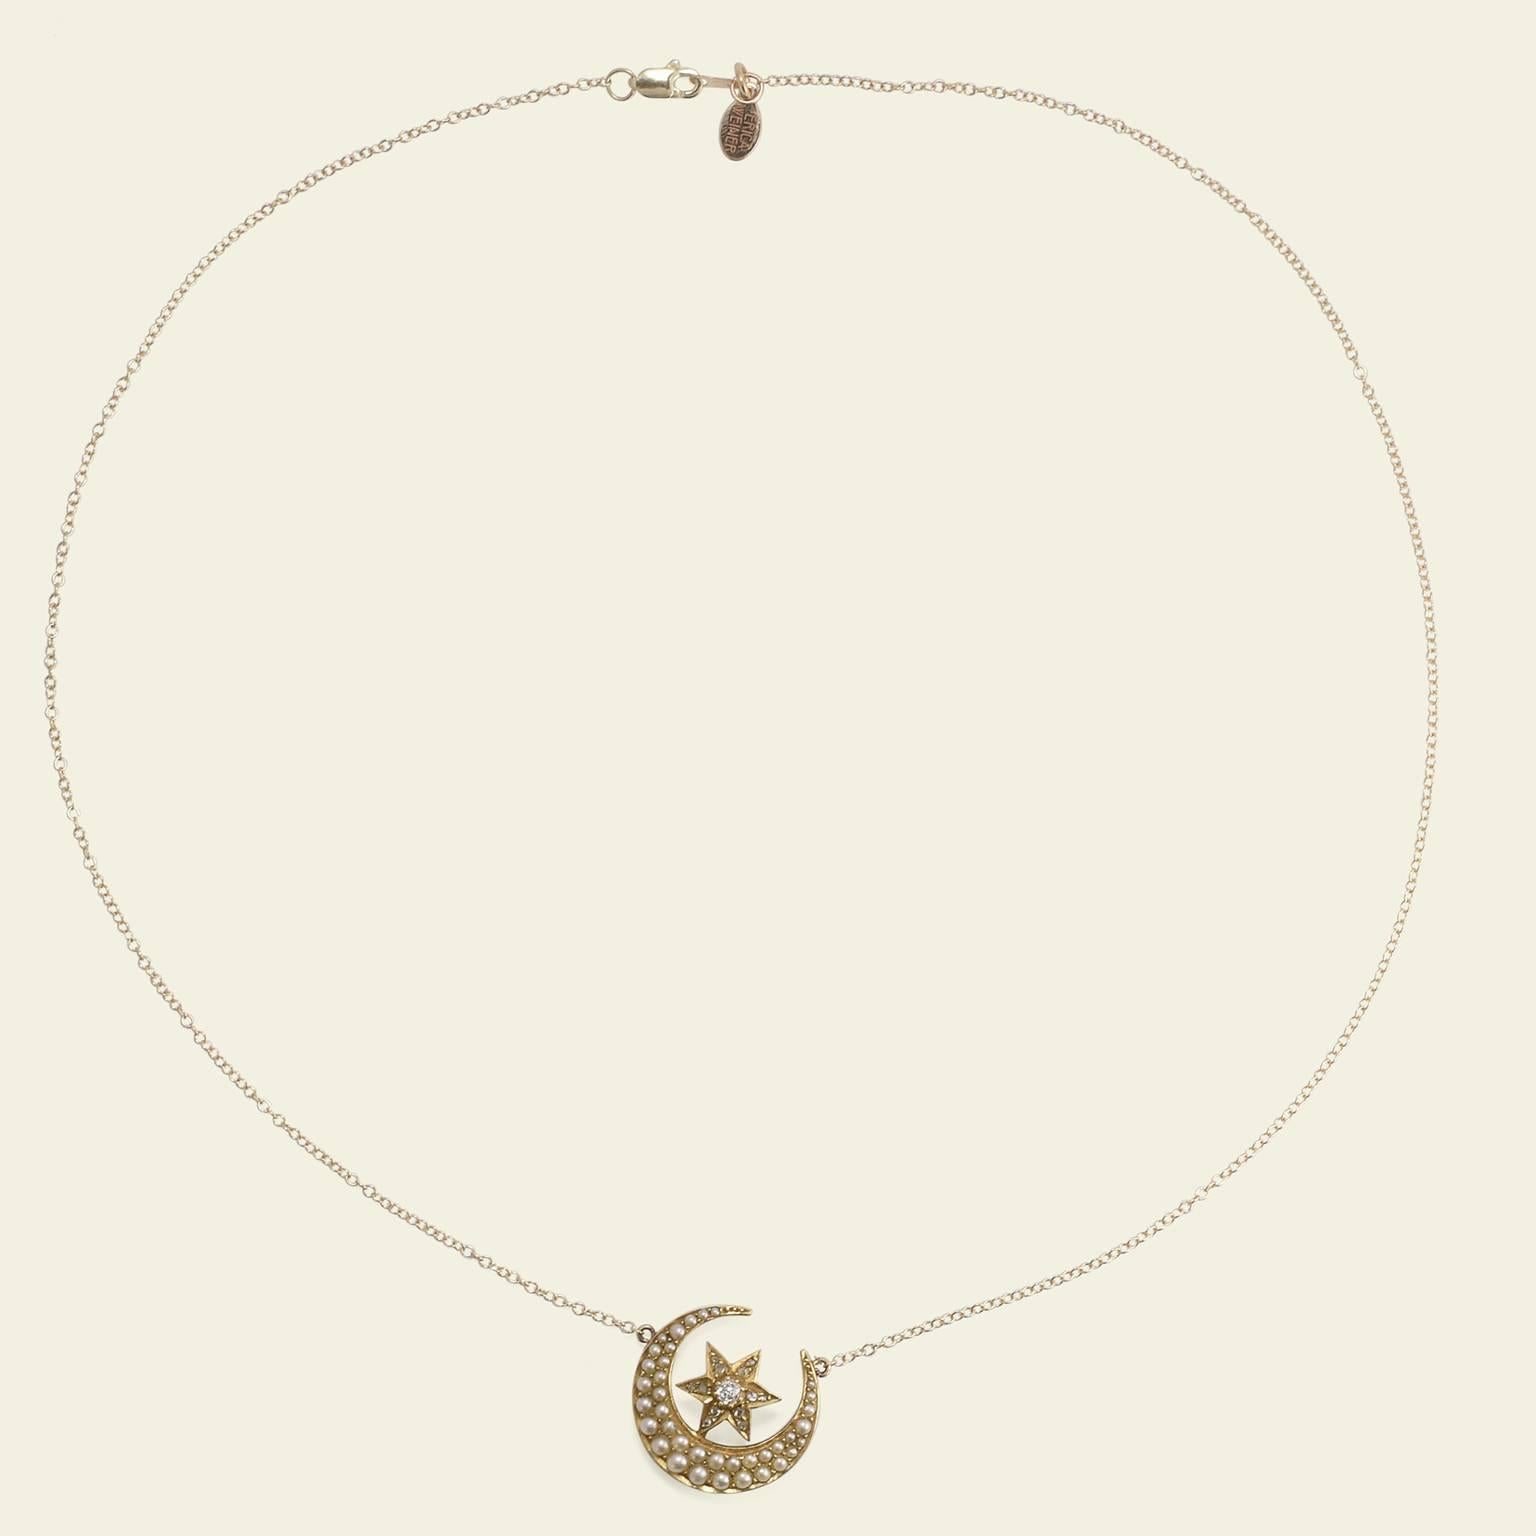 The crescent moon shape has been employed in jewelry design since time immemorial, and the Victorians embraced the symbol for its simplicity and its vaguely exotic connotations—it has its roots in ancient, ancient Akkadian and Phoenician art. This